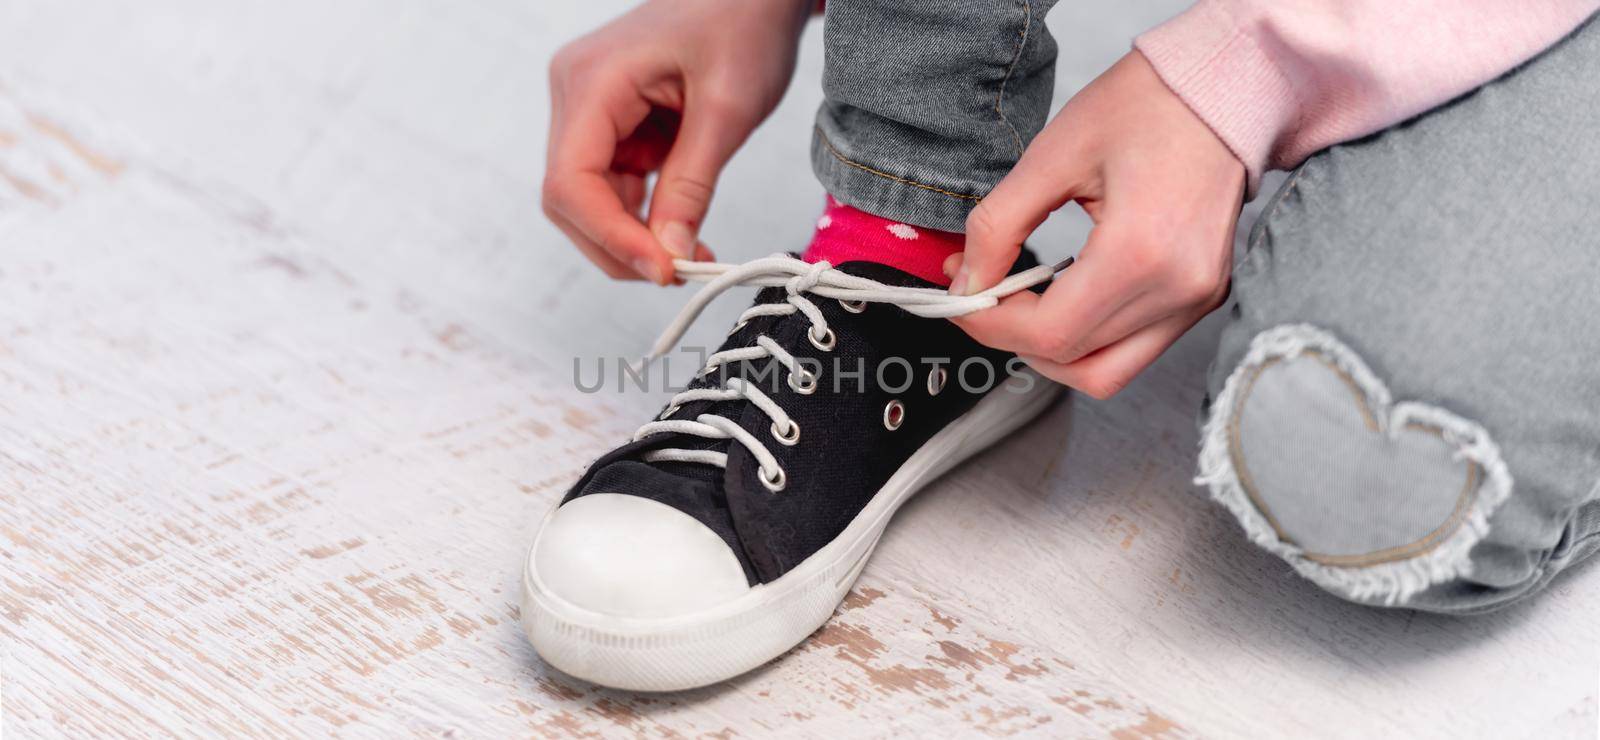 Little girl sitting on the floor and tying shoelaces on her black and white colour snikers